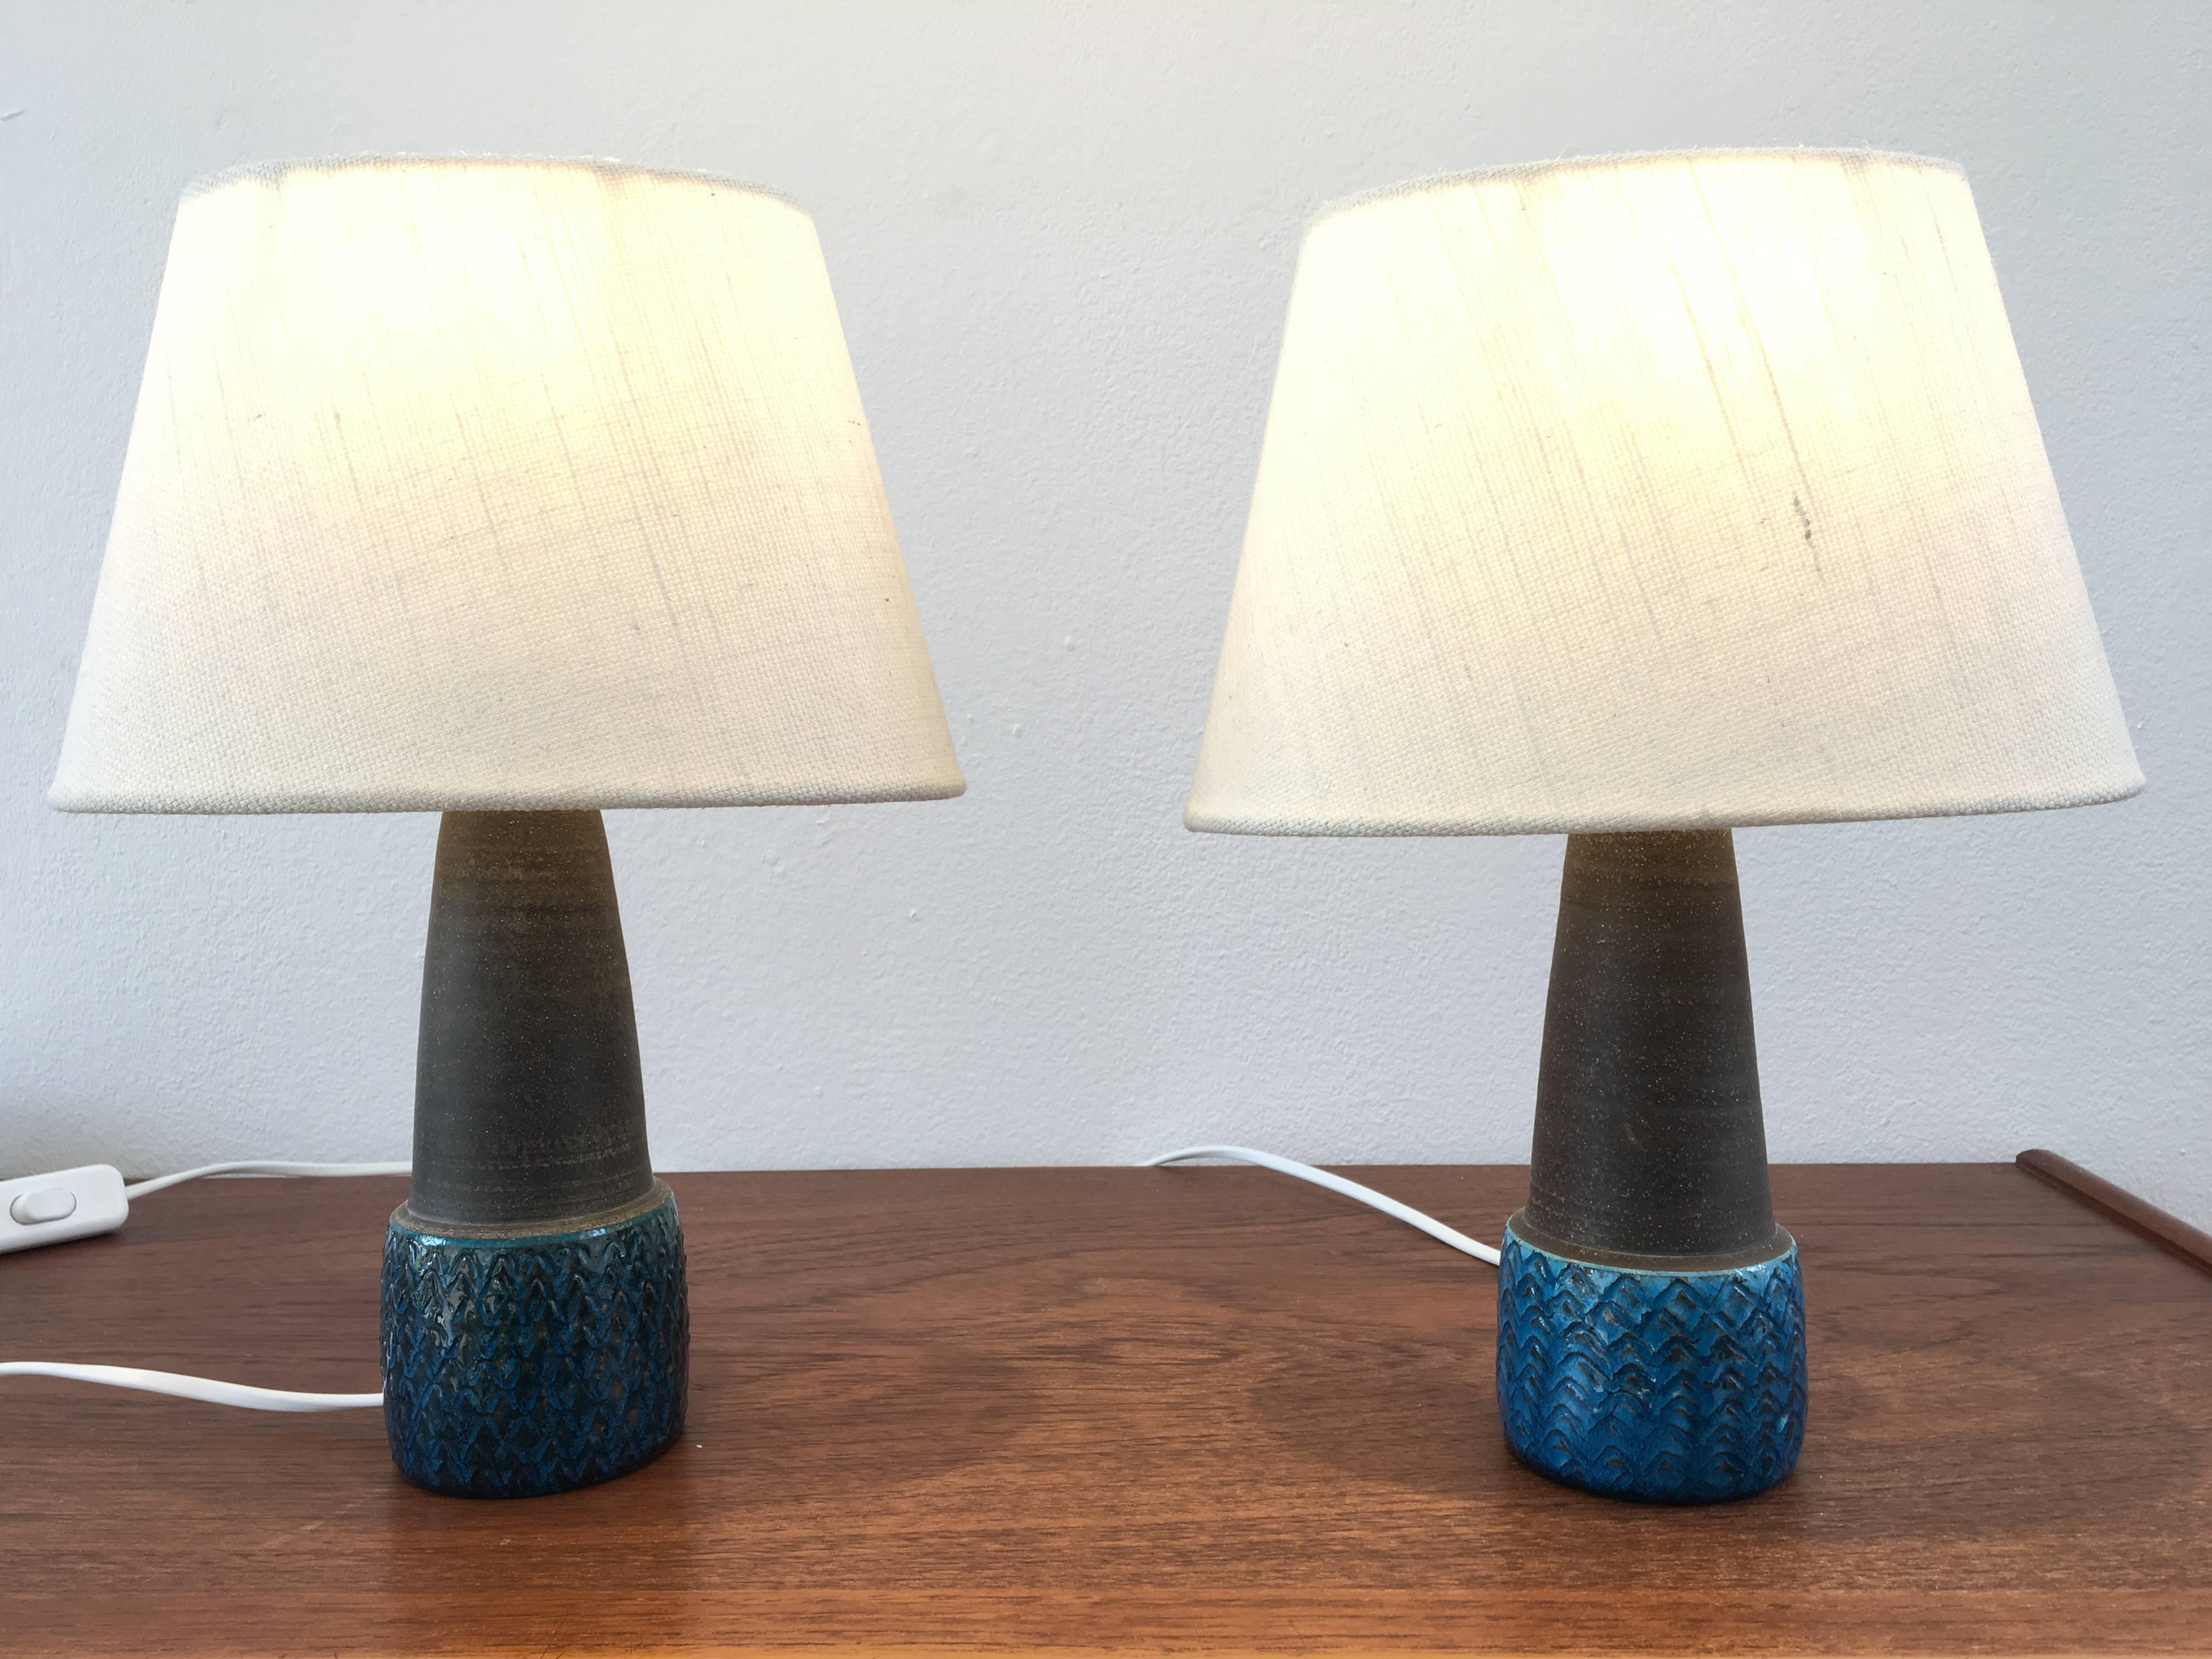 Ceramic Pair of Small Table Lamps with Turquoise Colored Glazing by Nils Kähler, Denmark